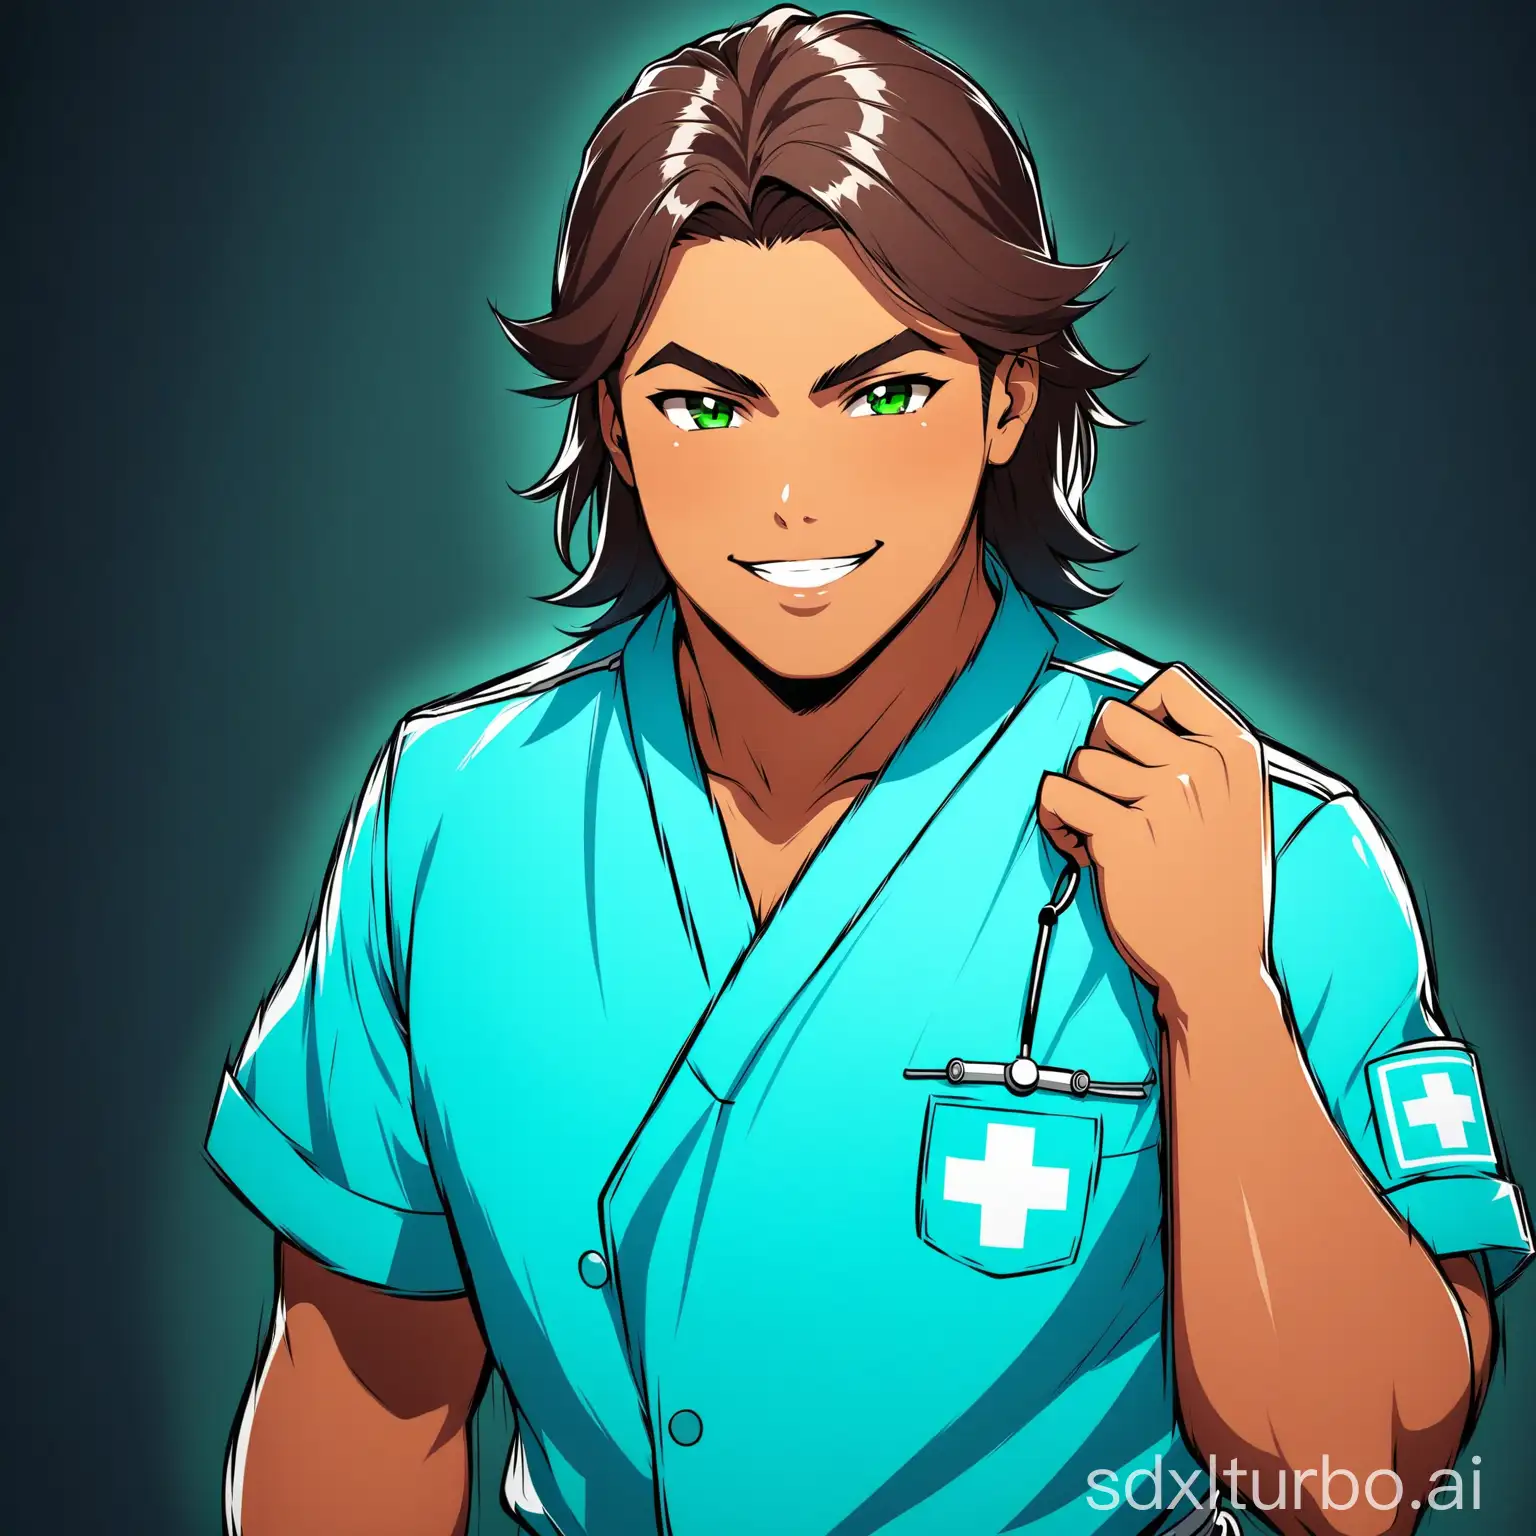 A tanned handsome chubby young man, mullet brown hair, green eyes, with blue nurse uniform, winking one eye, sensual posing, in a dark room